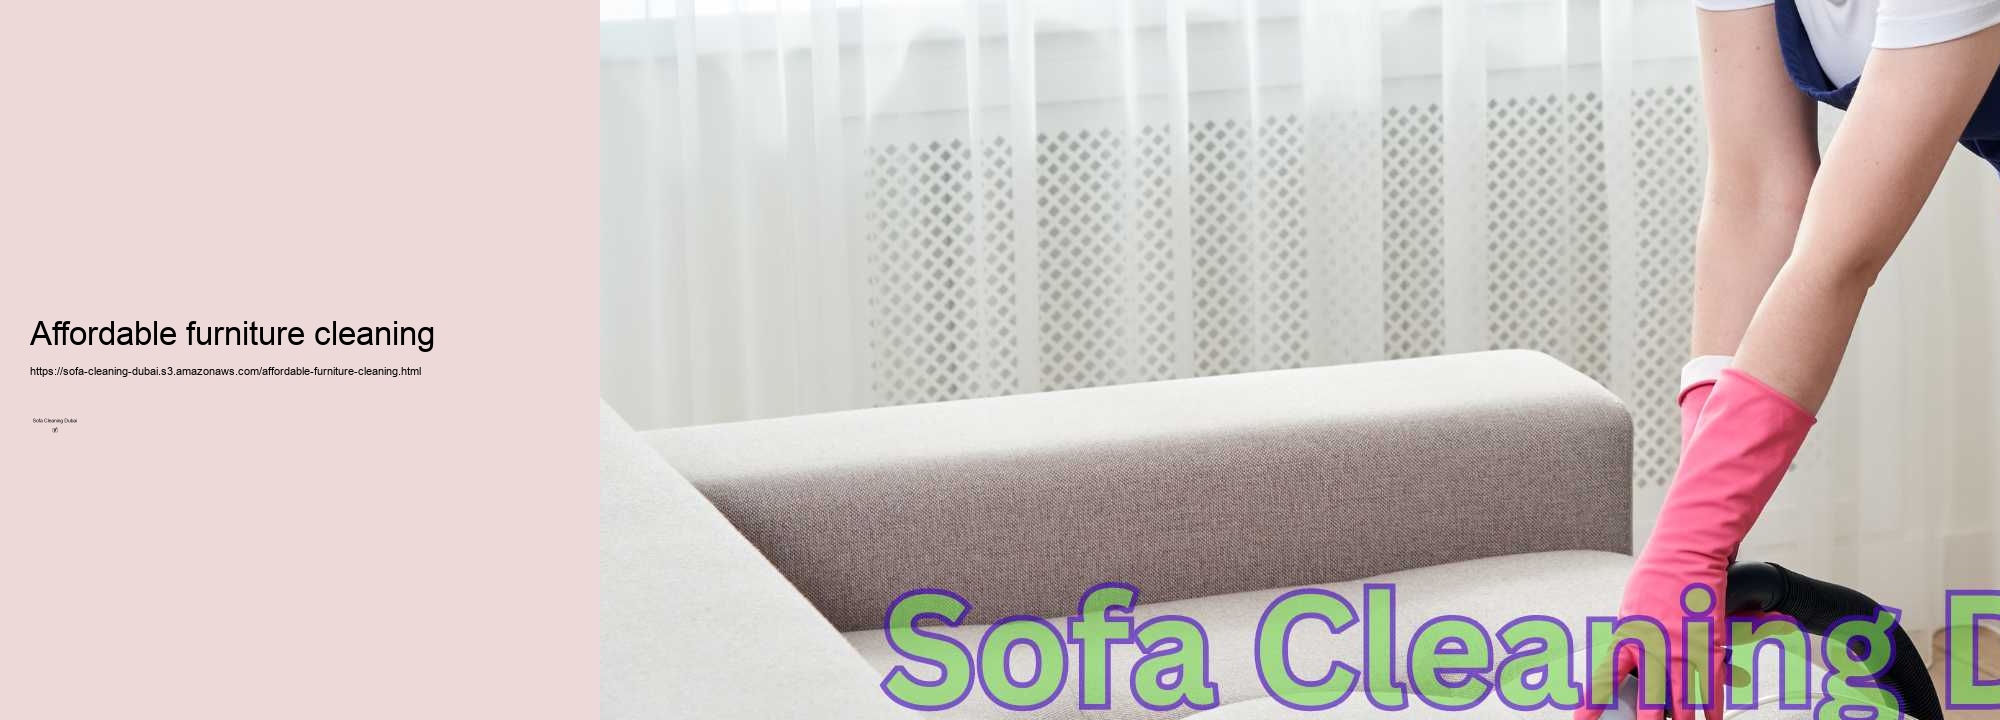 Affordable furniture cleaning